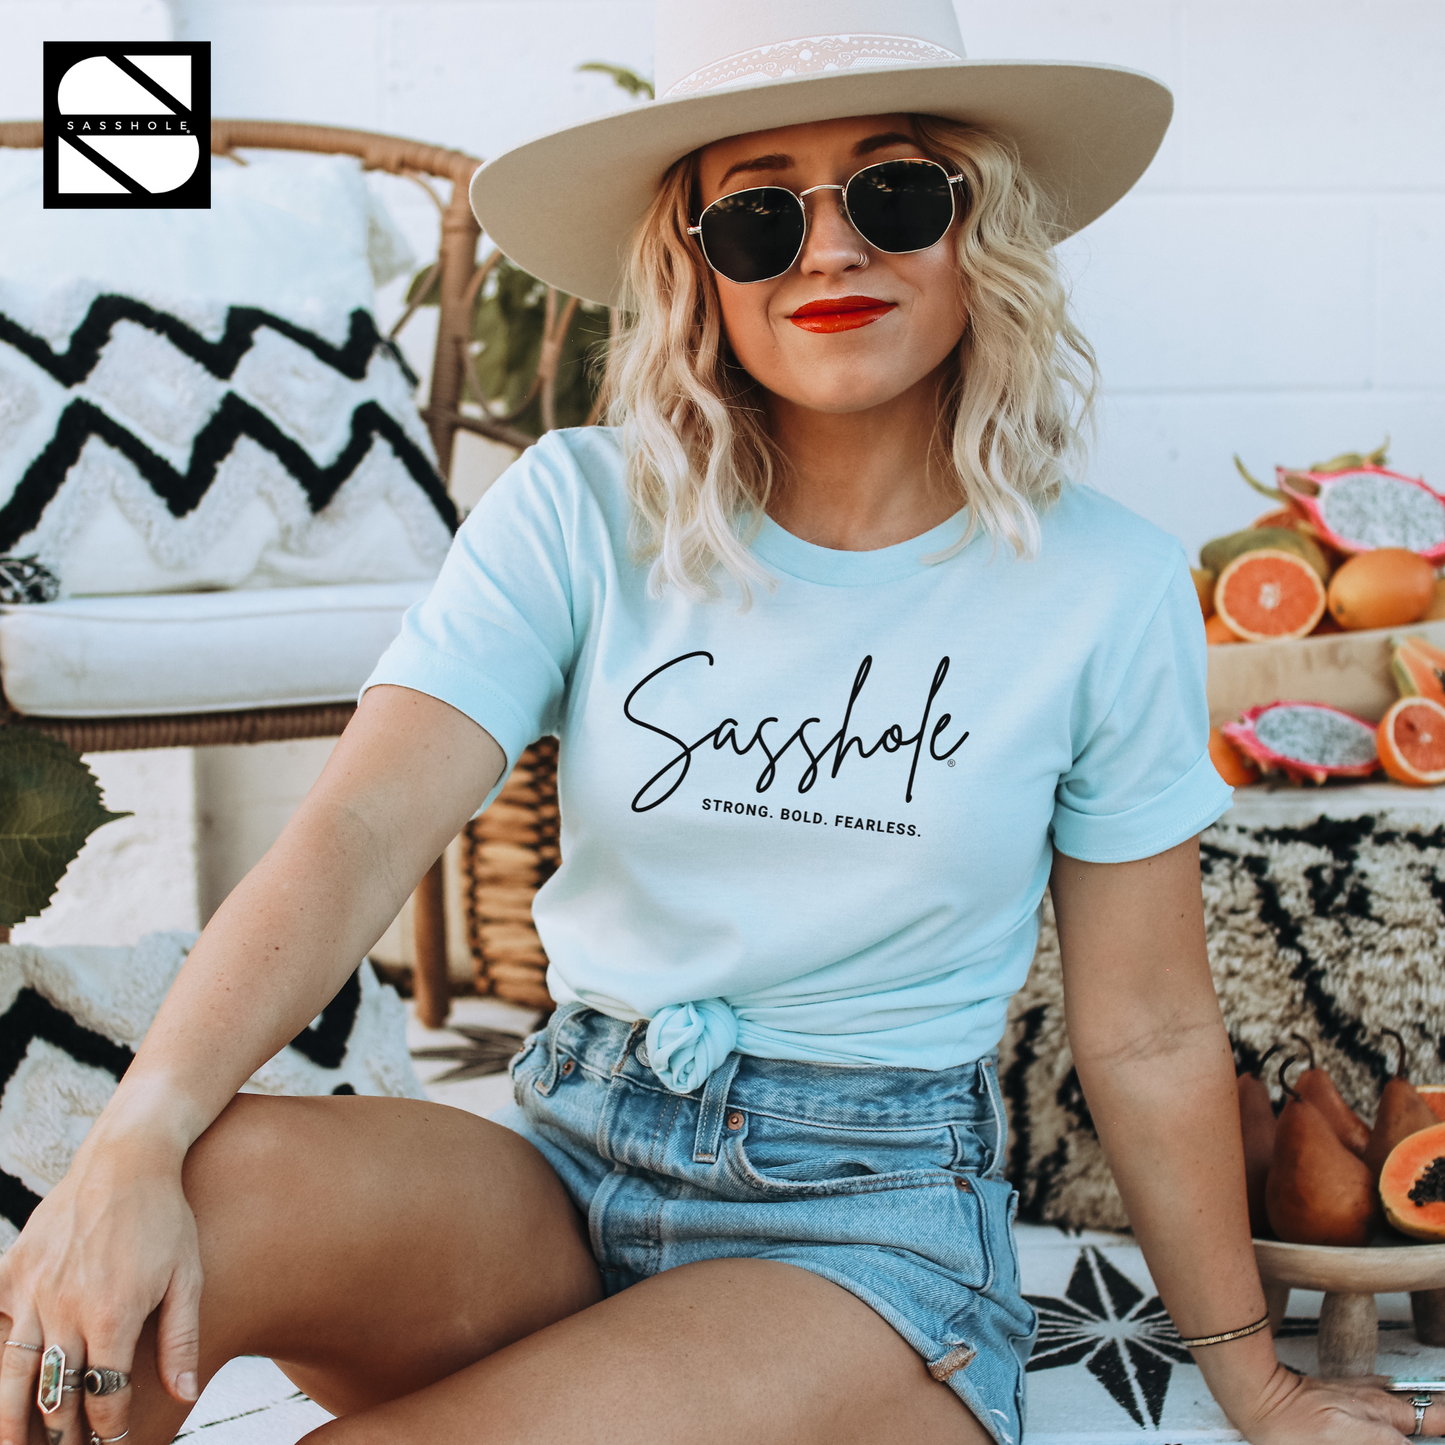 Make a Sassy Statement with Our Women's Sasshole® Stong. Bold. Fearless T-Shirt